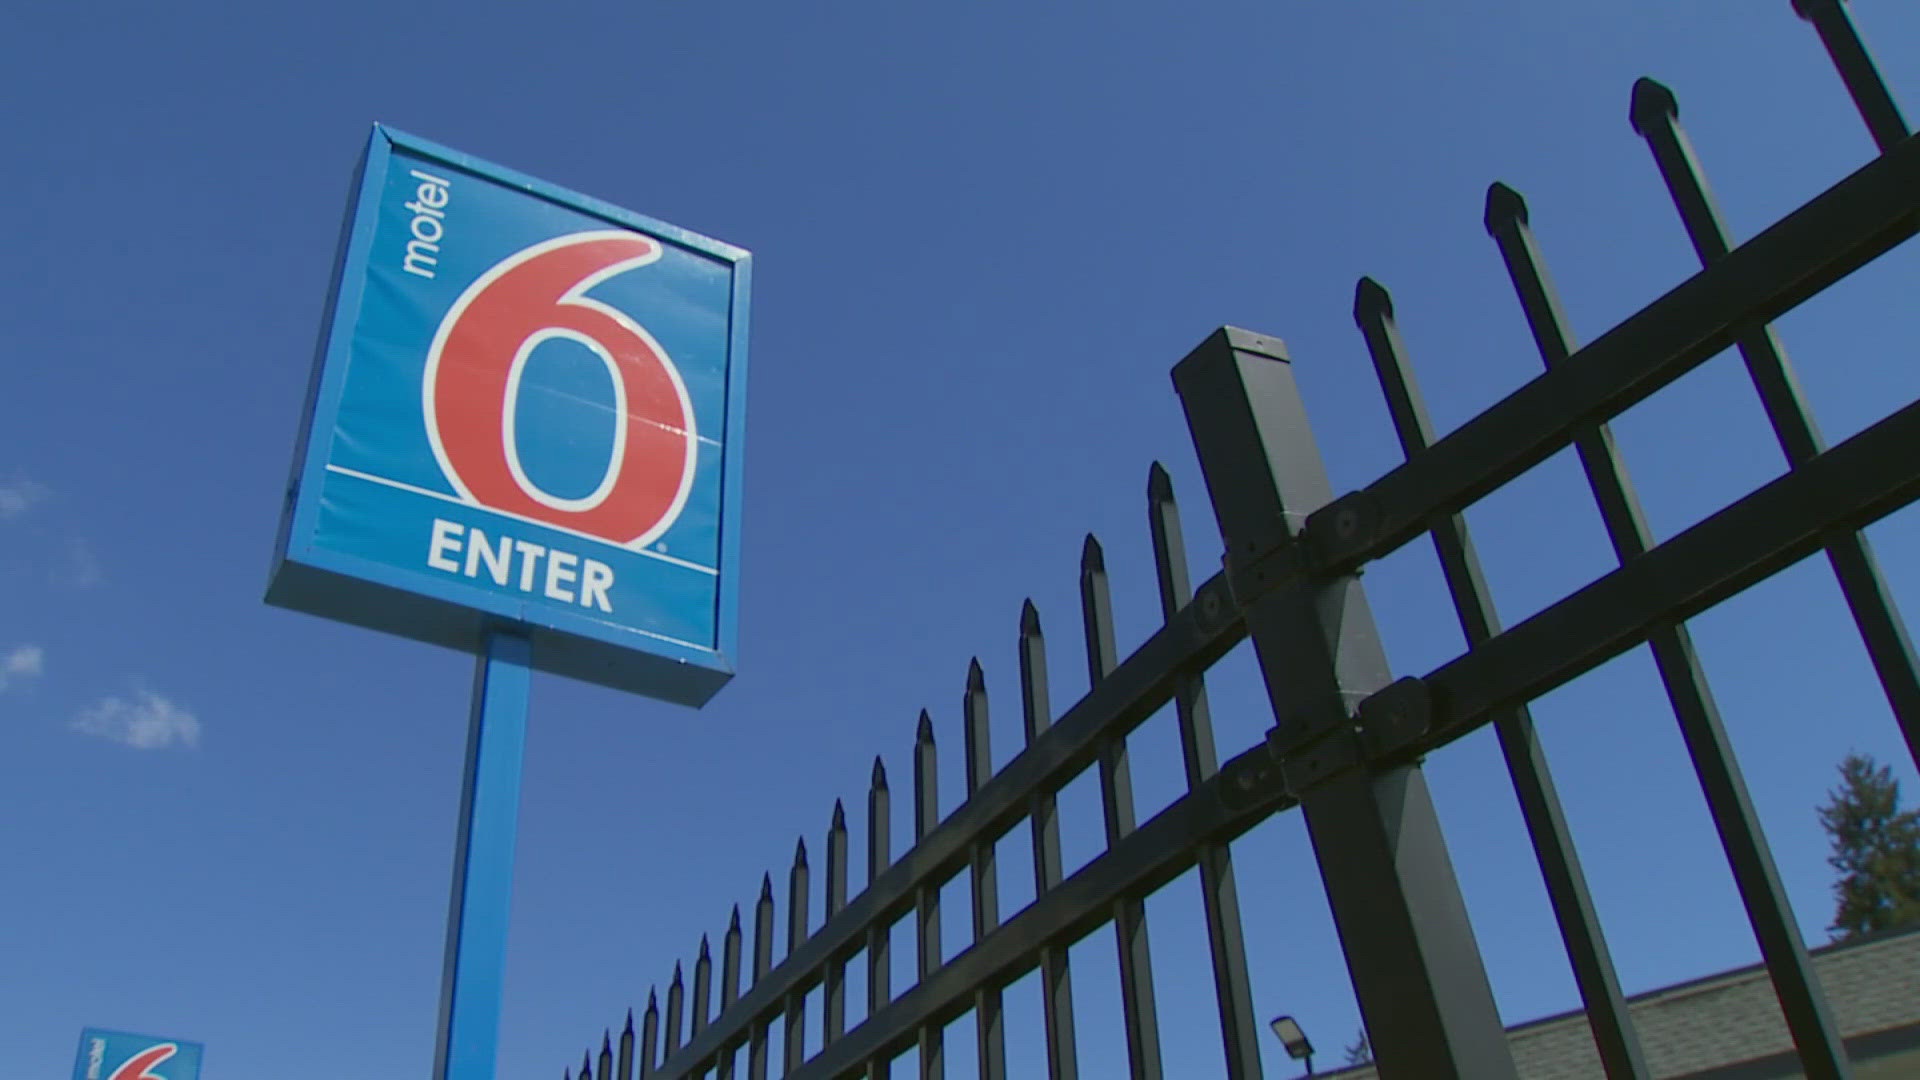 The lawsuit accused Motel 6 of allegedly knowing sex trafficking was happening on the premises and profiting from it.